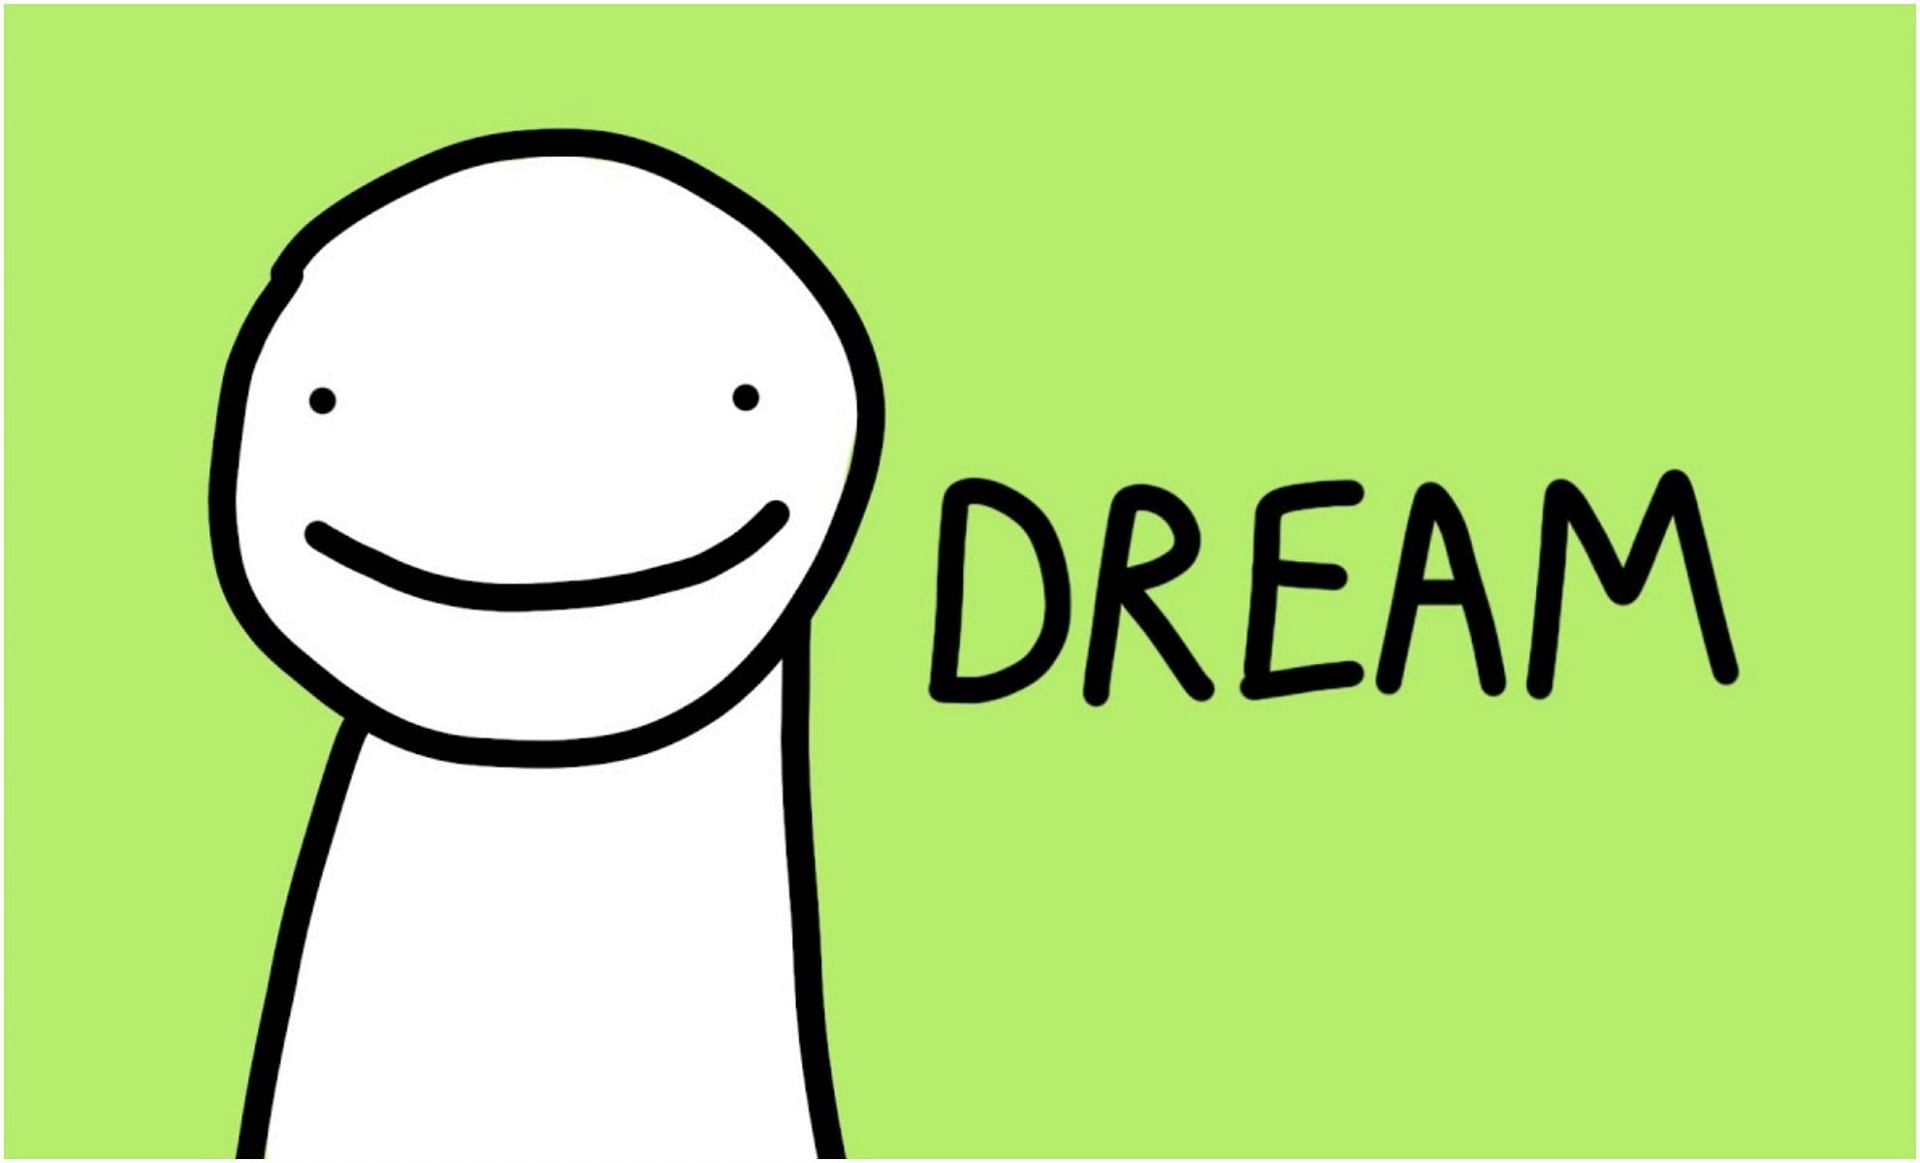 Dream&#039;s YouTube thumbnail (Image via DOODLE CLUBHOUSE on YouTube)